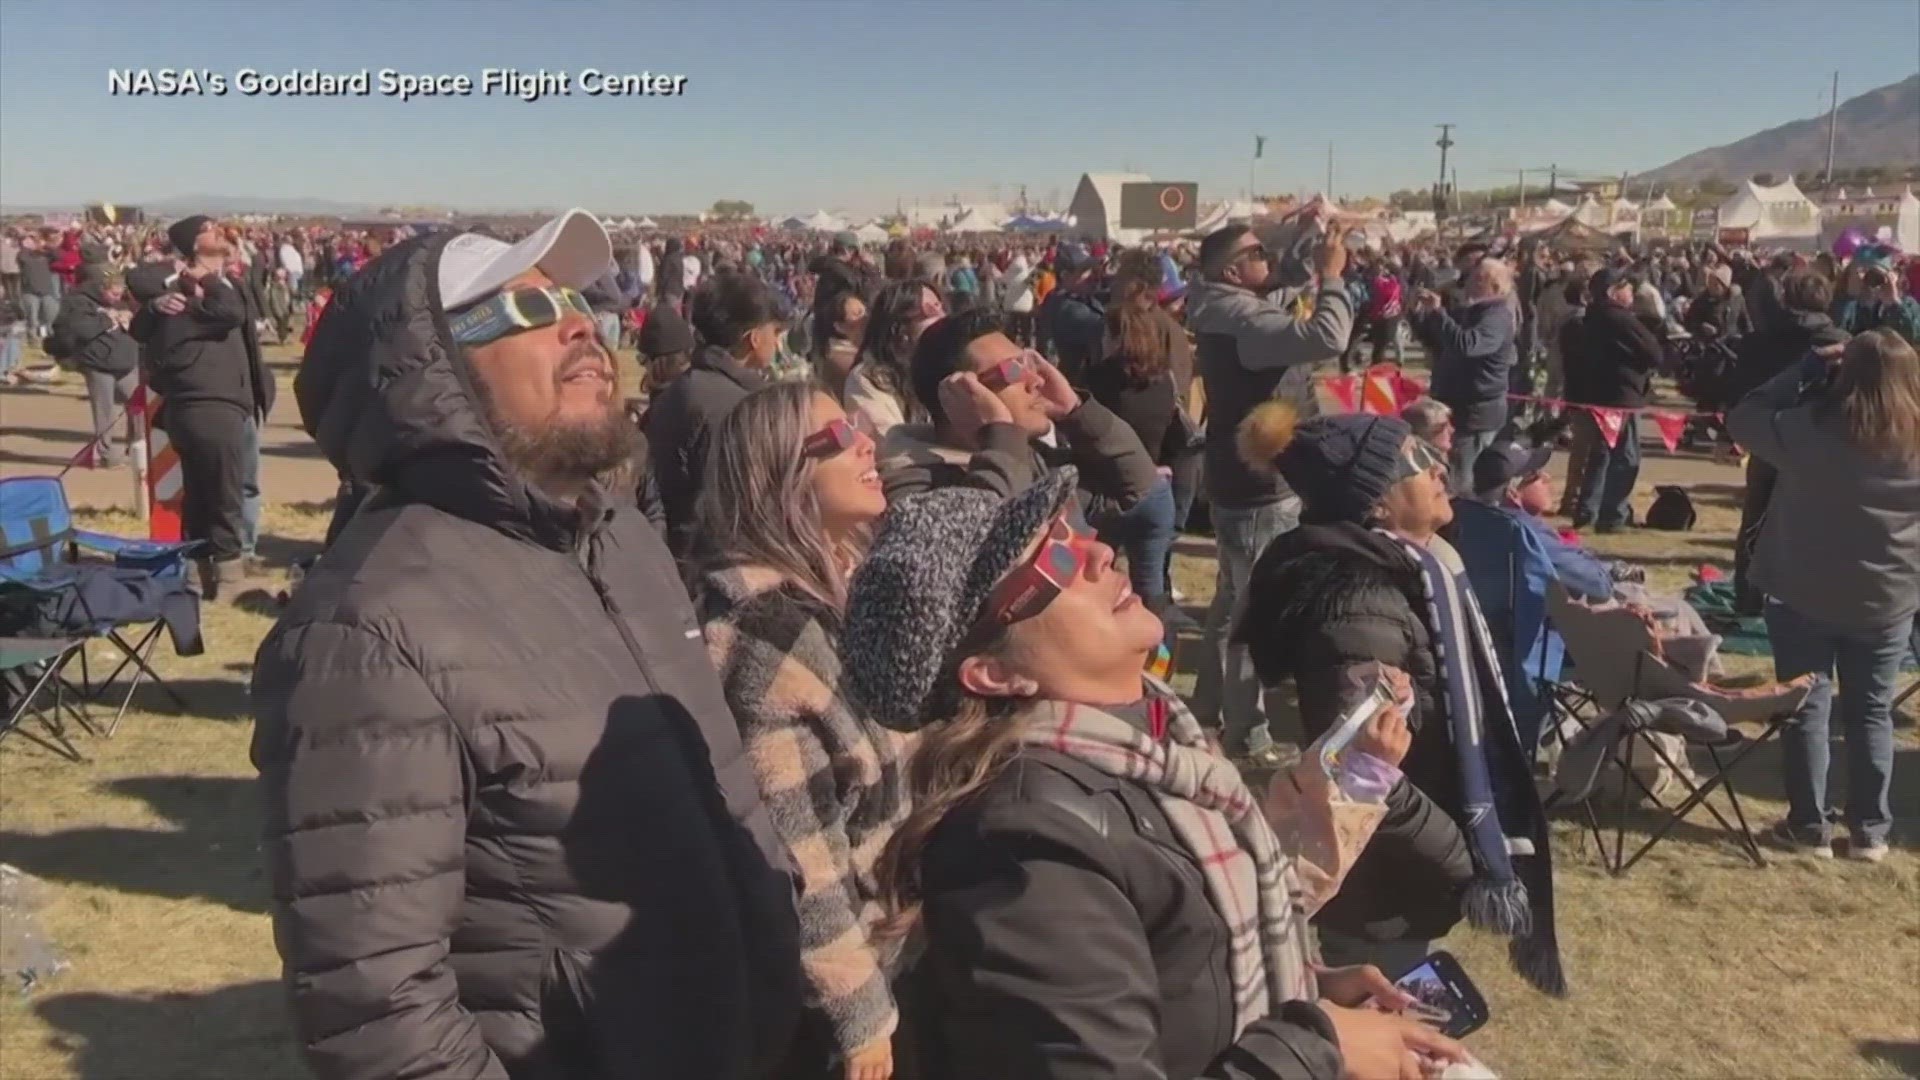 Nearly half a million visitors are expected to travel to DFW for the celestial phenomenon.